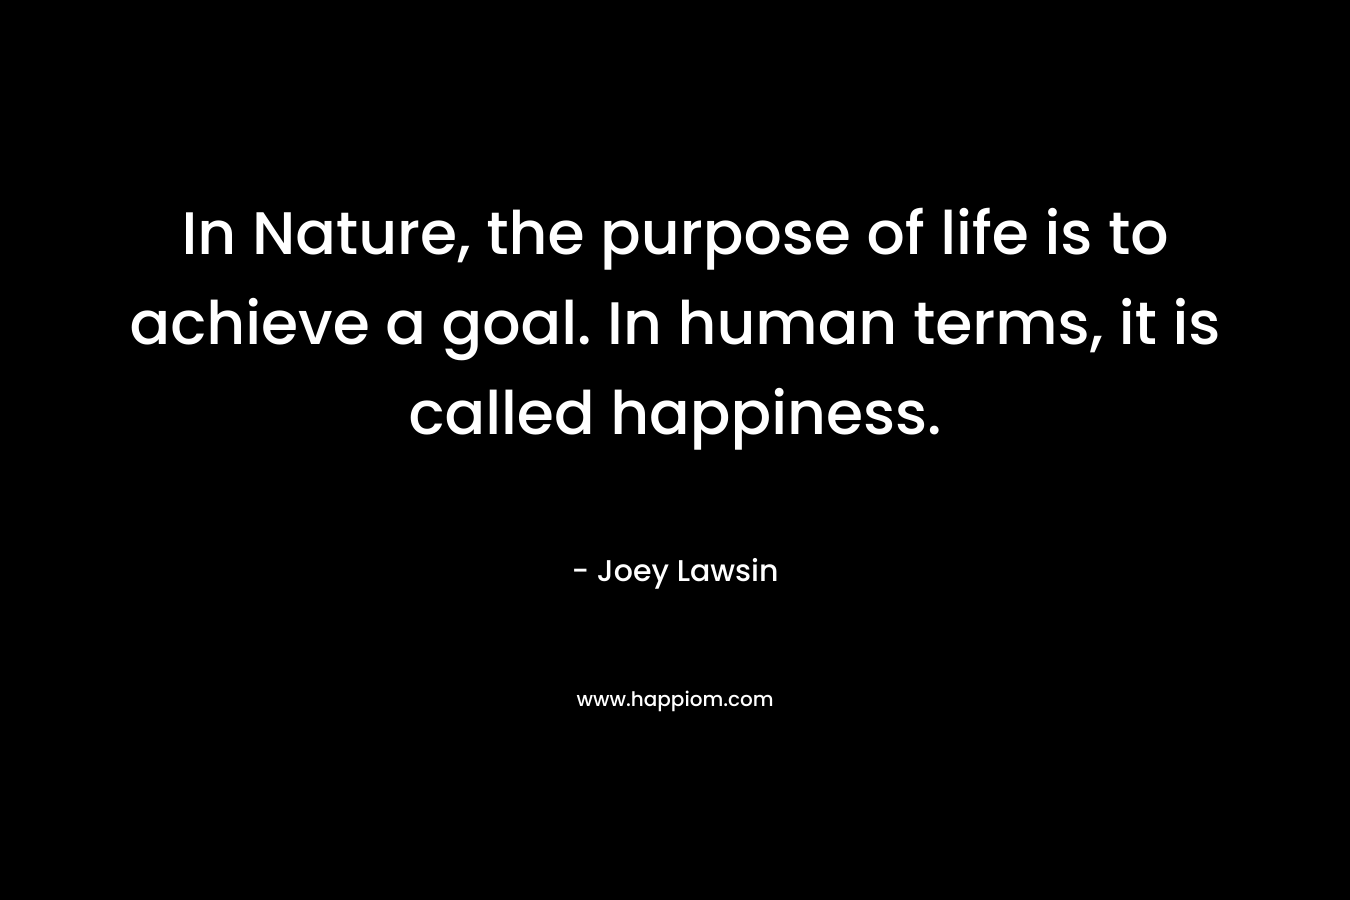 In Nature, the purpose of life is to achieve a goal. In human terms, it is called happiness.